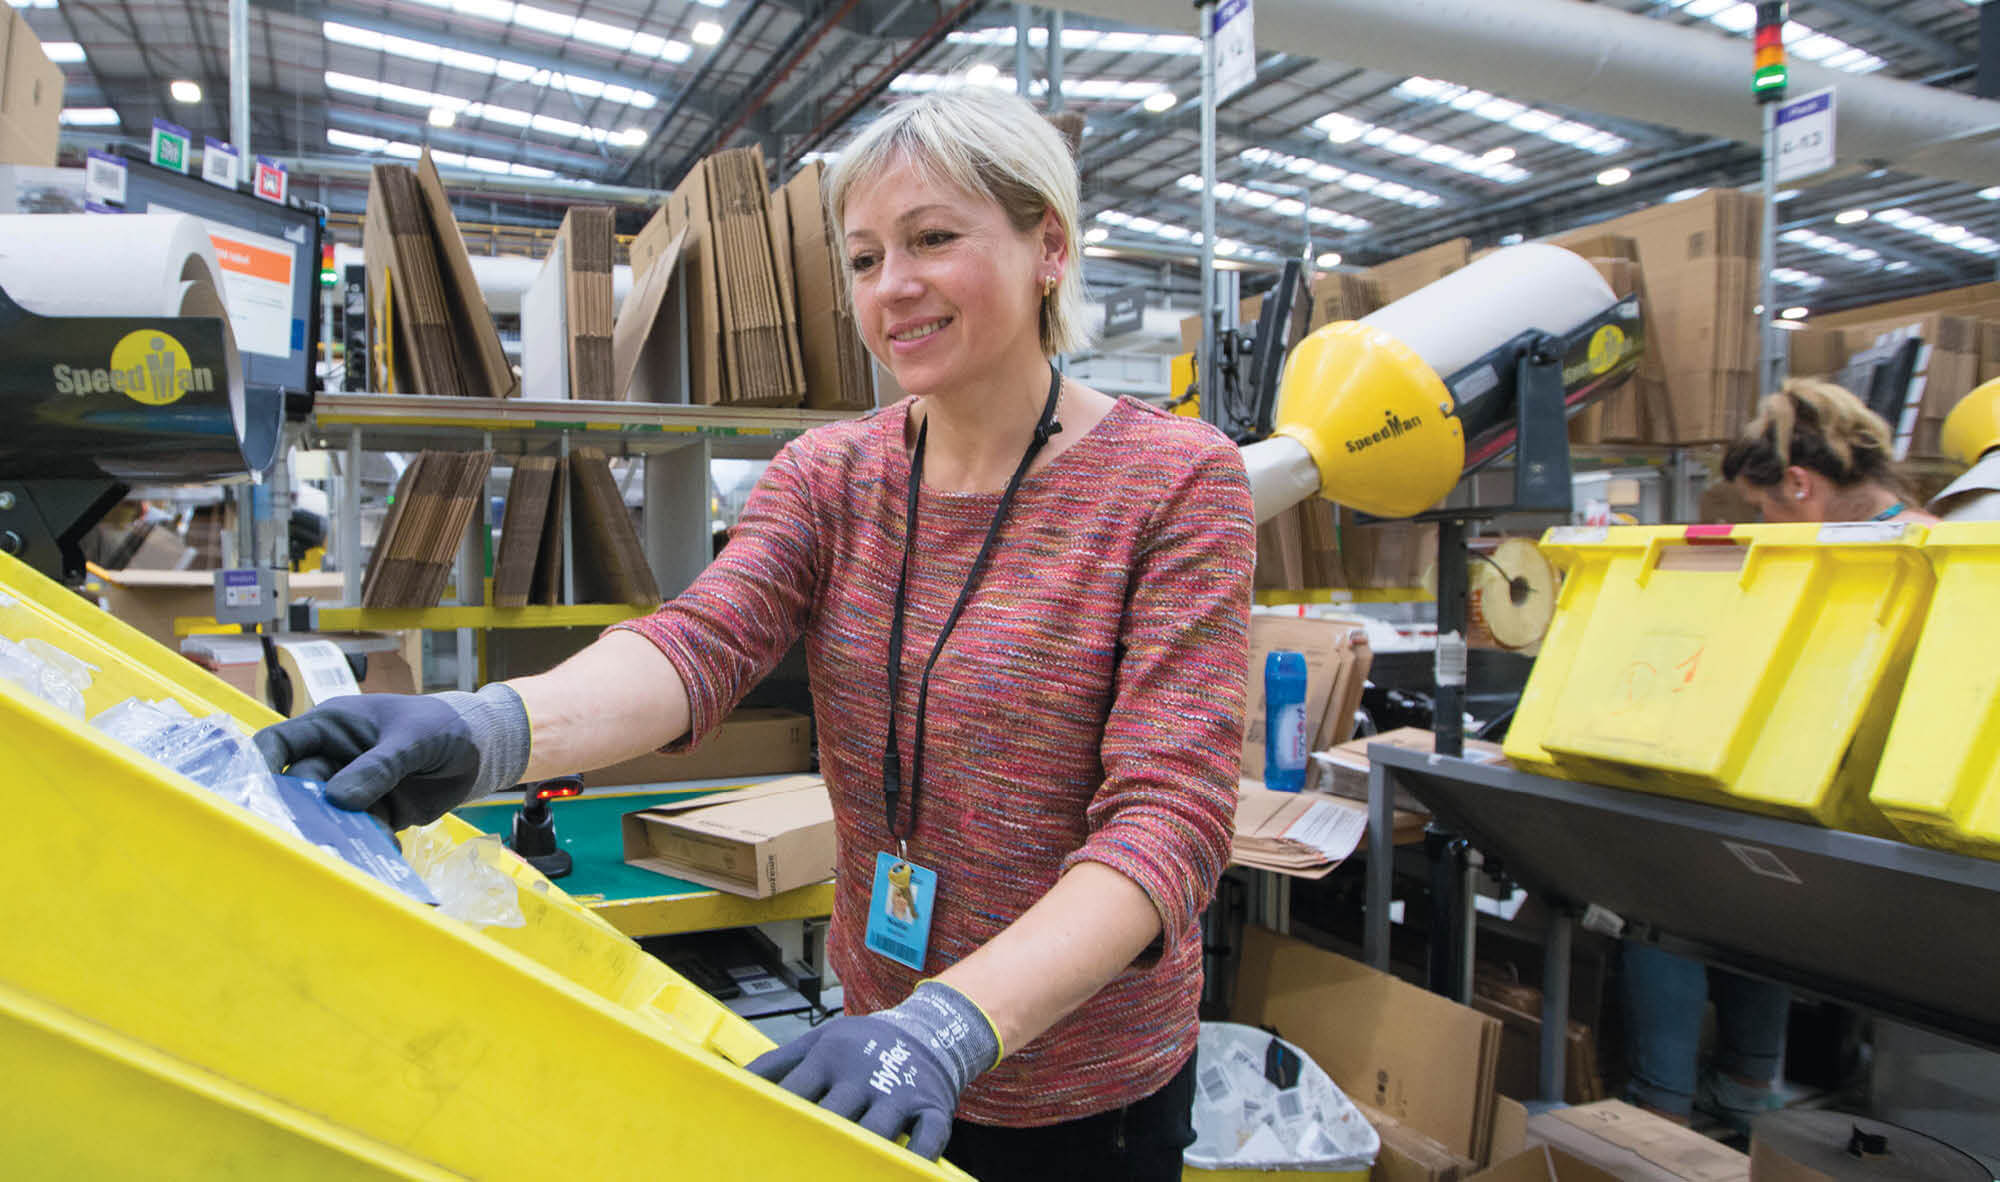 A woman sorting through items in a yellow bin at an Amazon warehouse.